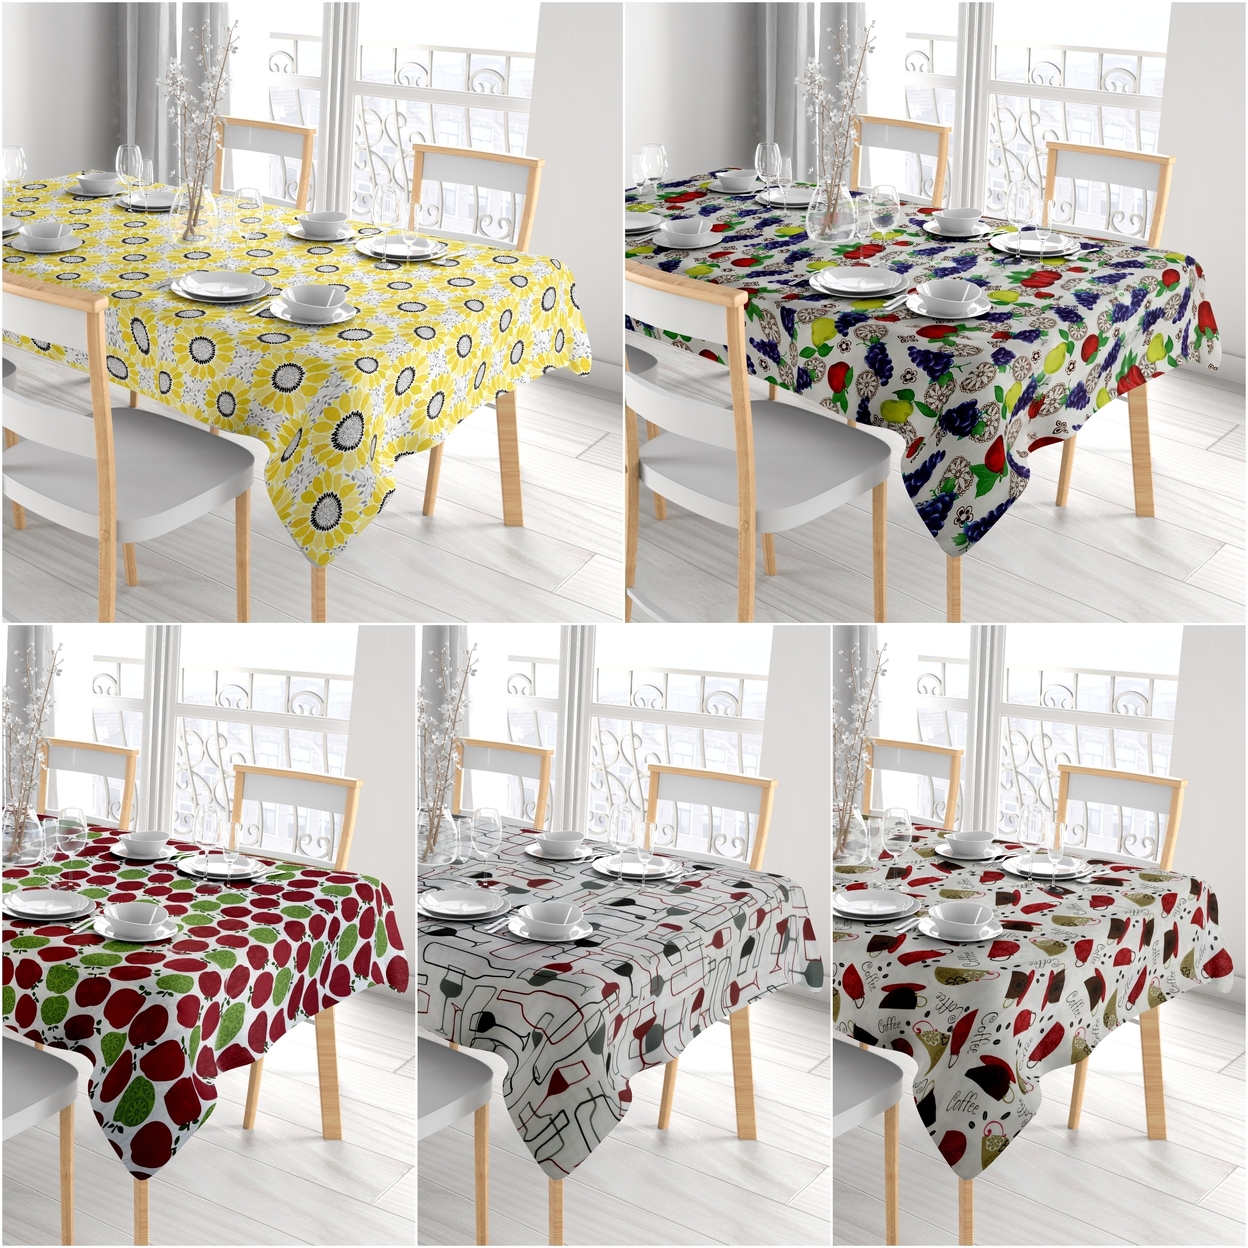 Kitchen Dining Water Resistant Oil Proof Flannel Back PVC Vinyl Tablecloth - 52'' X 70'', Print